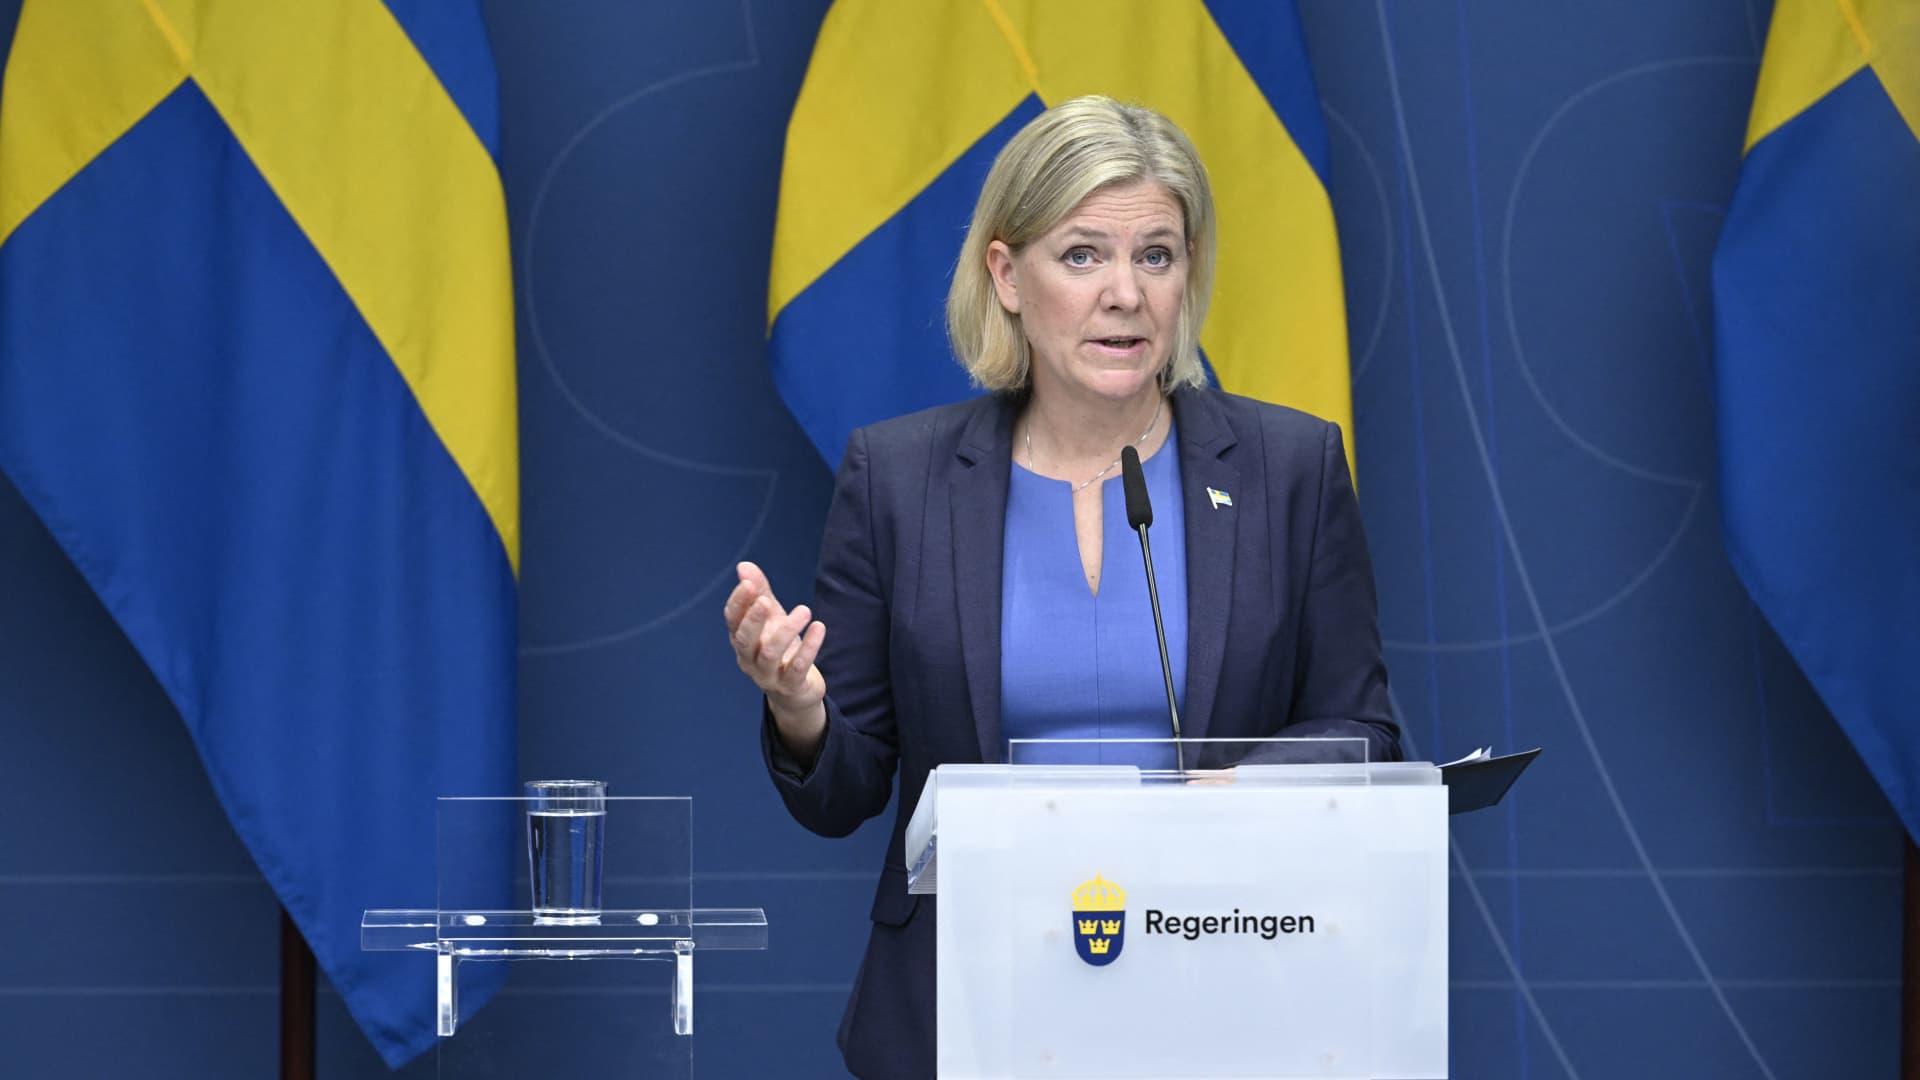 Andersson became Sweden's first-ever female prime minister last year and has led the country's historic bid to join NATO following Russia's onslaught in Ukraine.